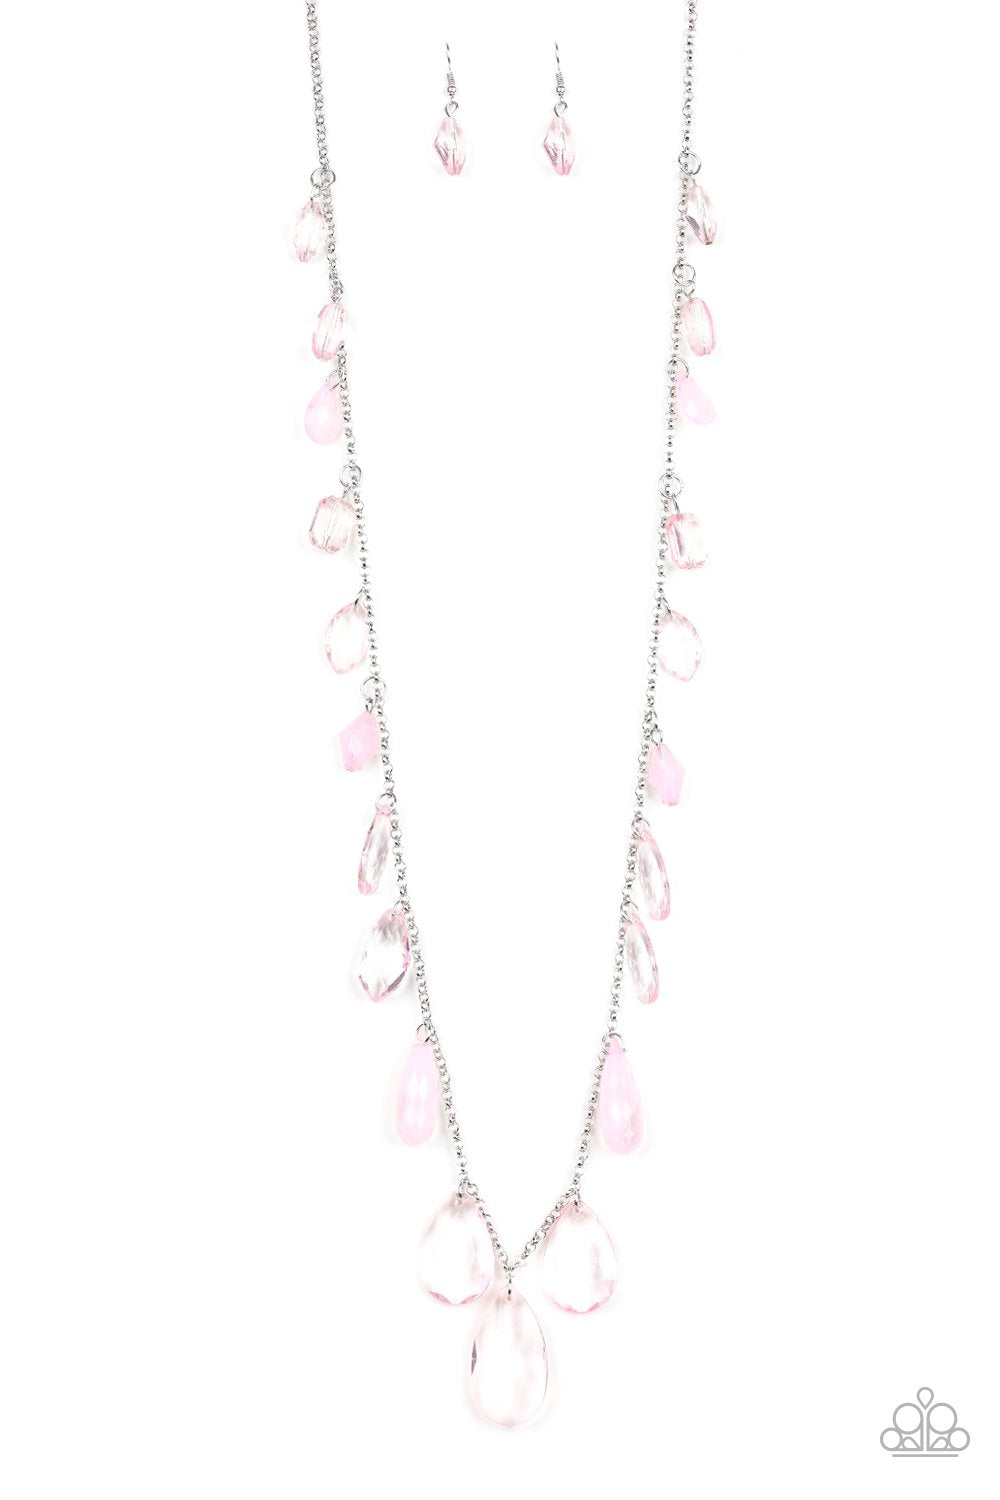 GLOW And Steady Wins The Race - Pink Necklace